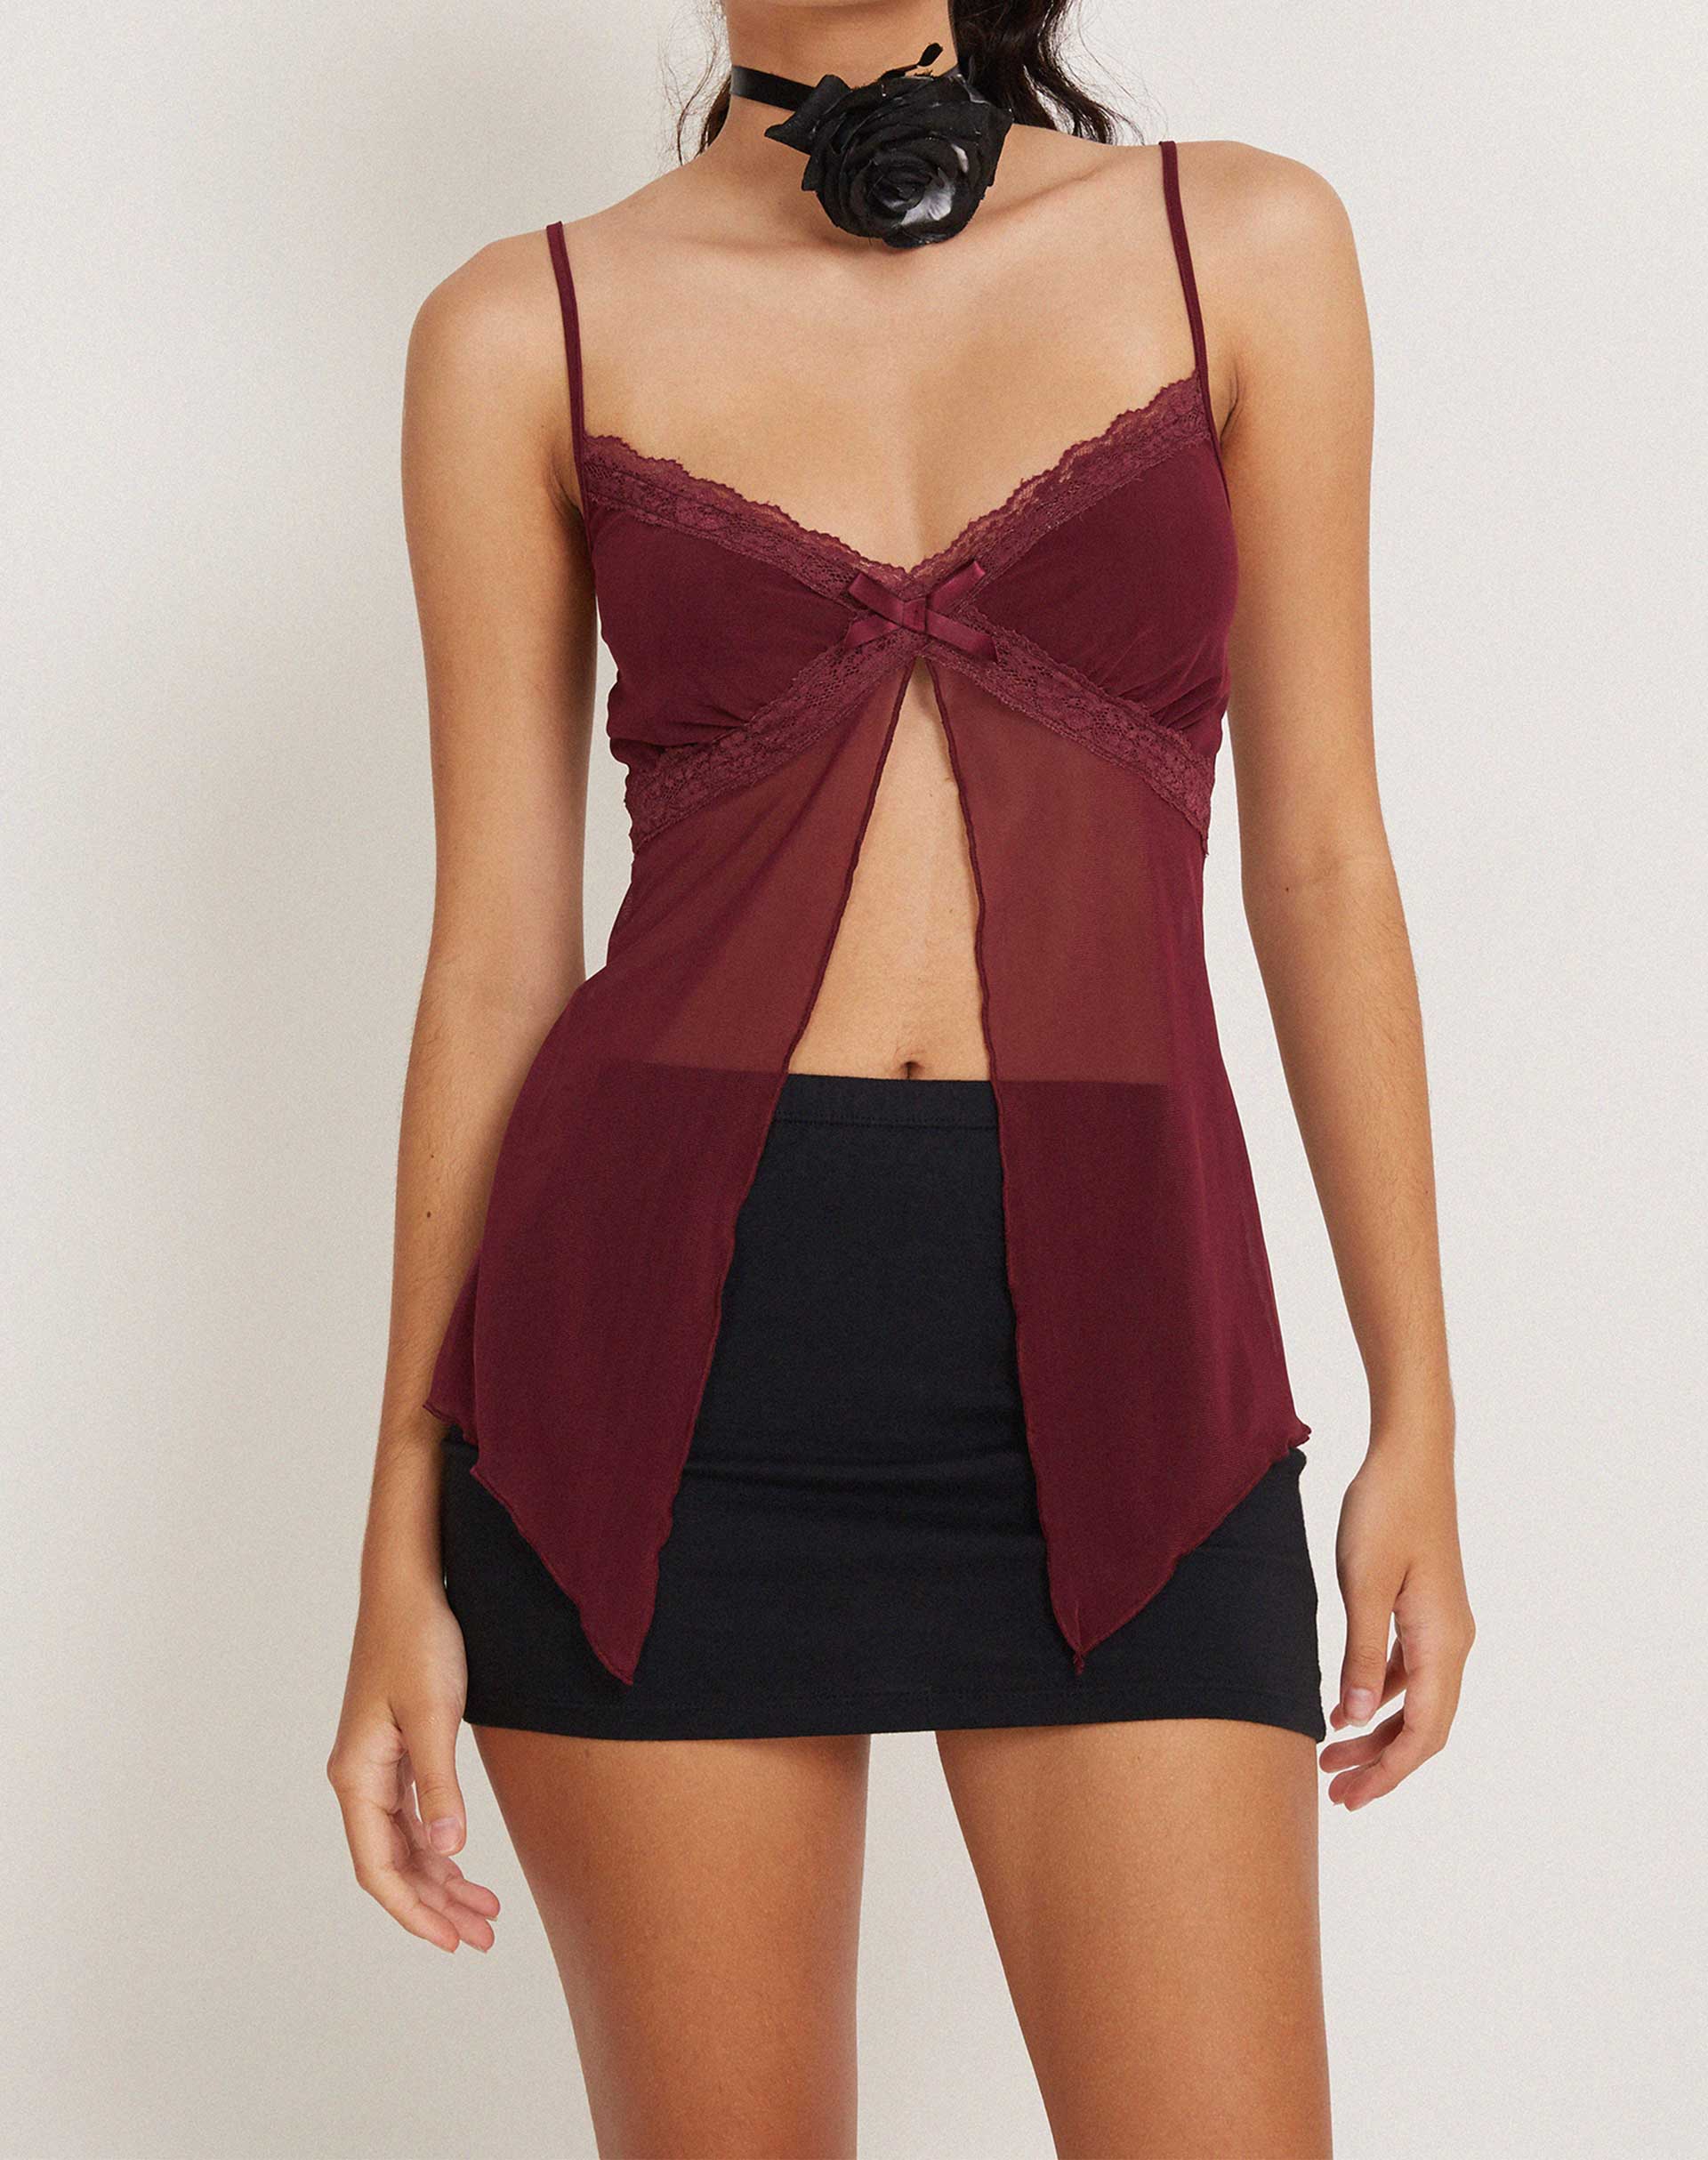 image of Ariela Butterfly Top in Burgundy